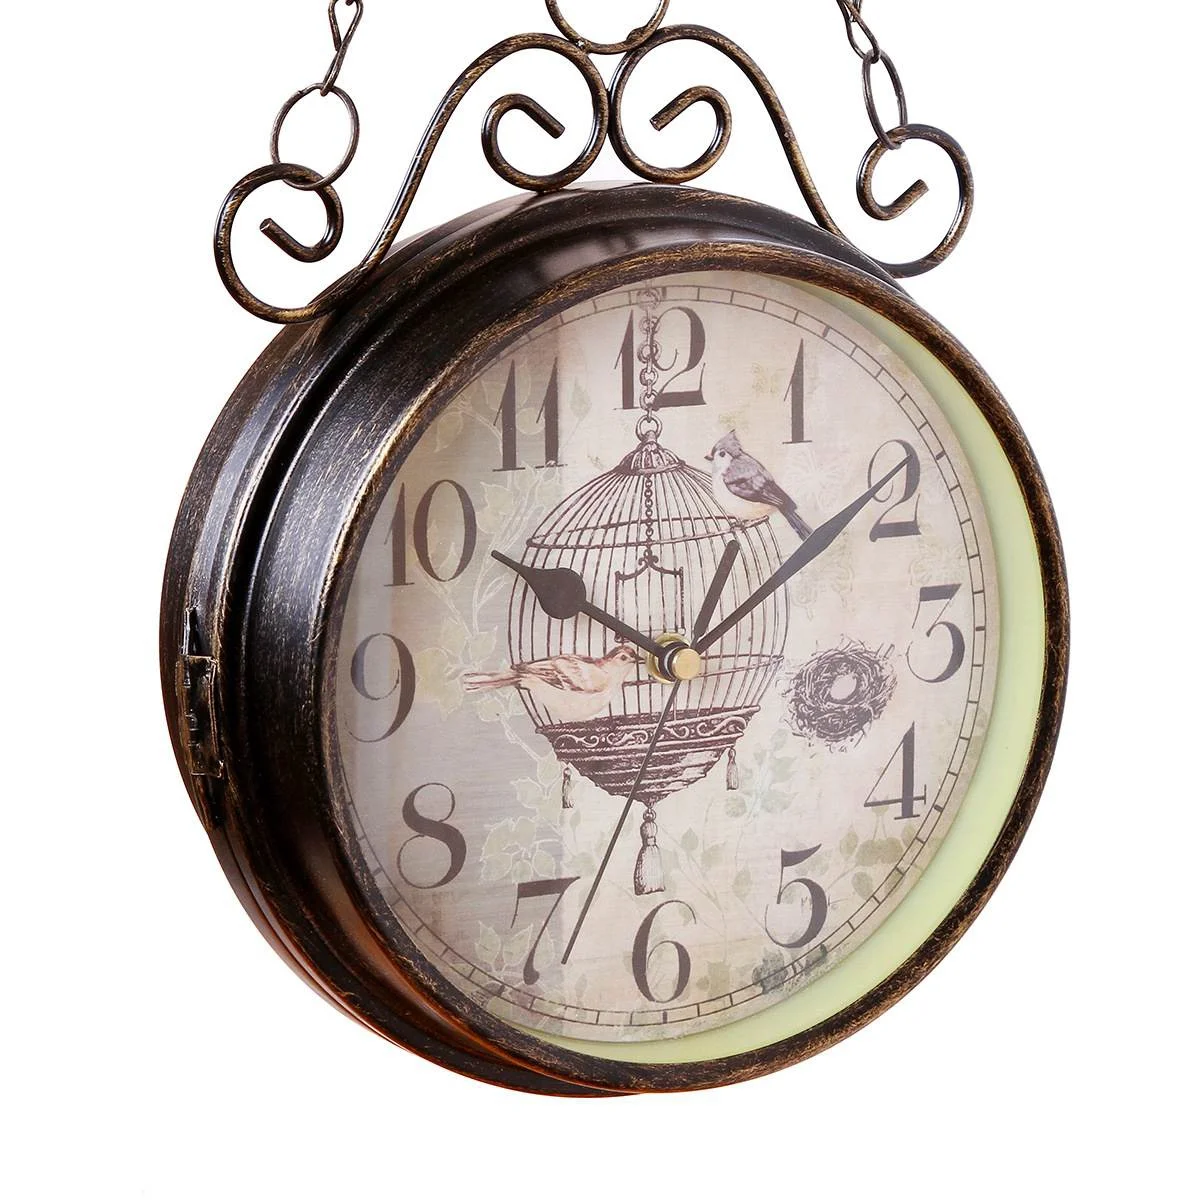 Antique Outdoor Garden Wall Station Metal Clock Double Sided Bird Vintage Retro Round Wall Mount Hanging Home Decor